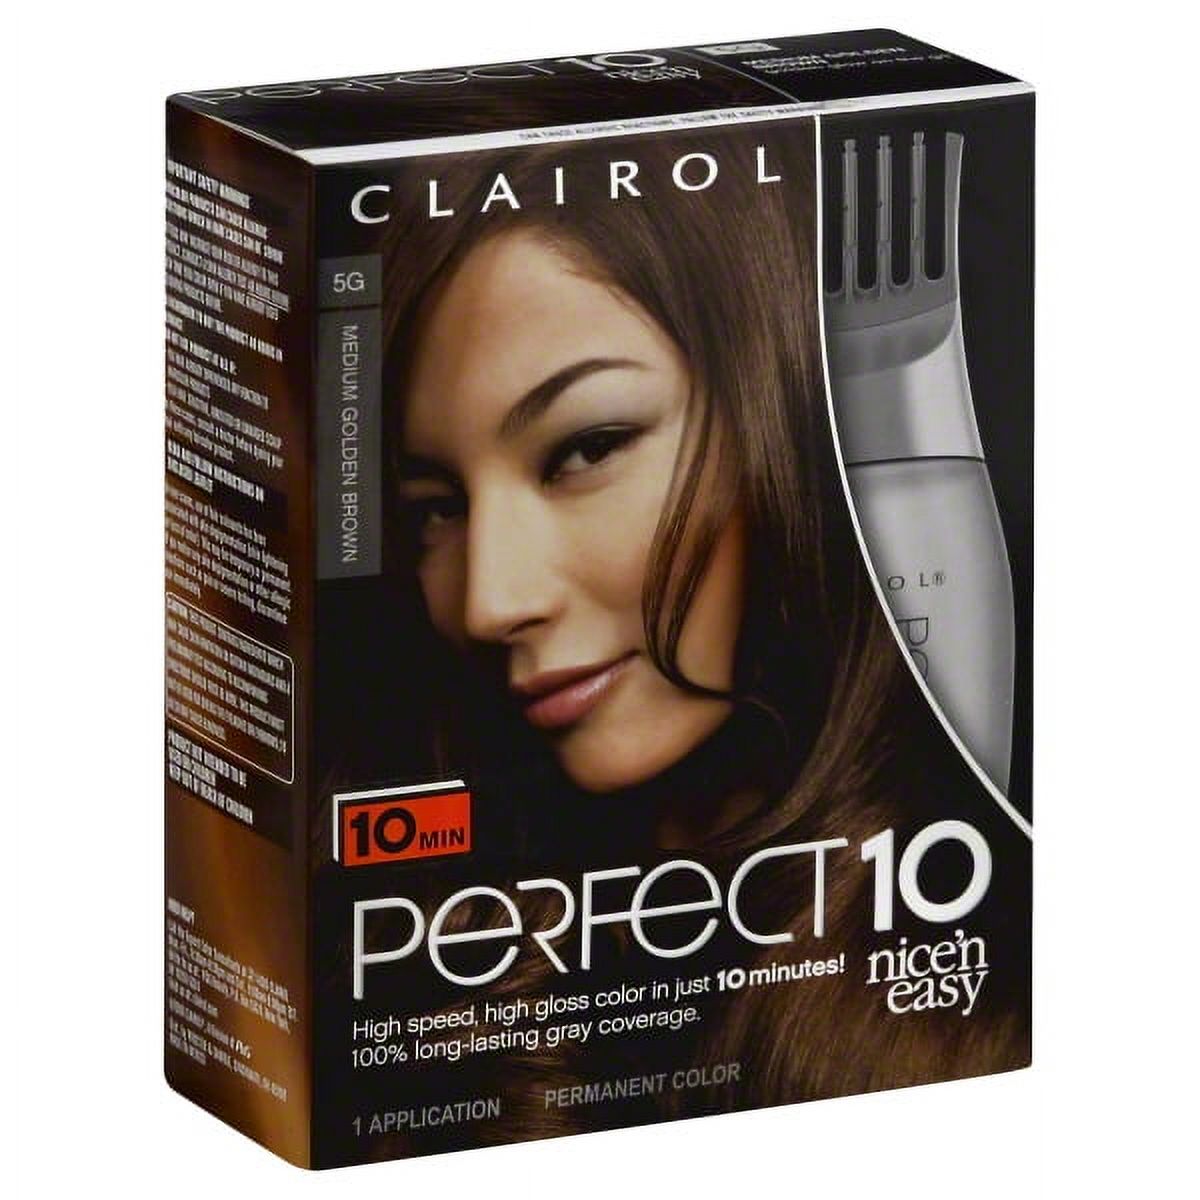 Clairol nice 'n easy perfect 10 #5g golden brown - image 1 of 7